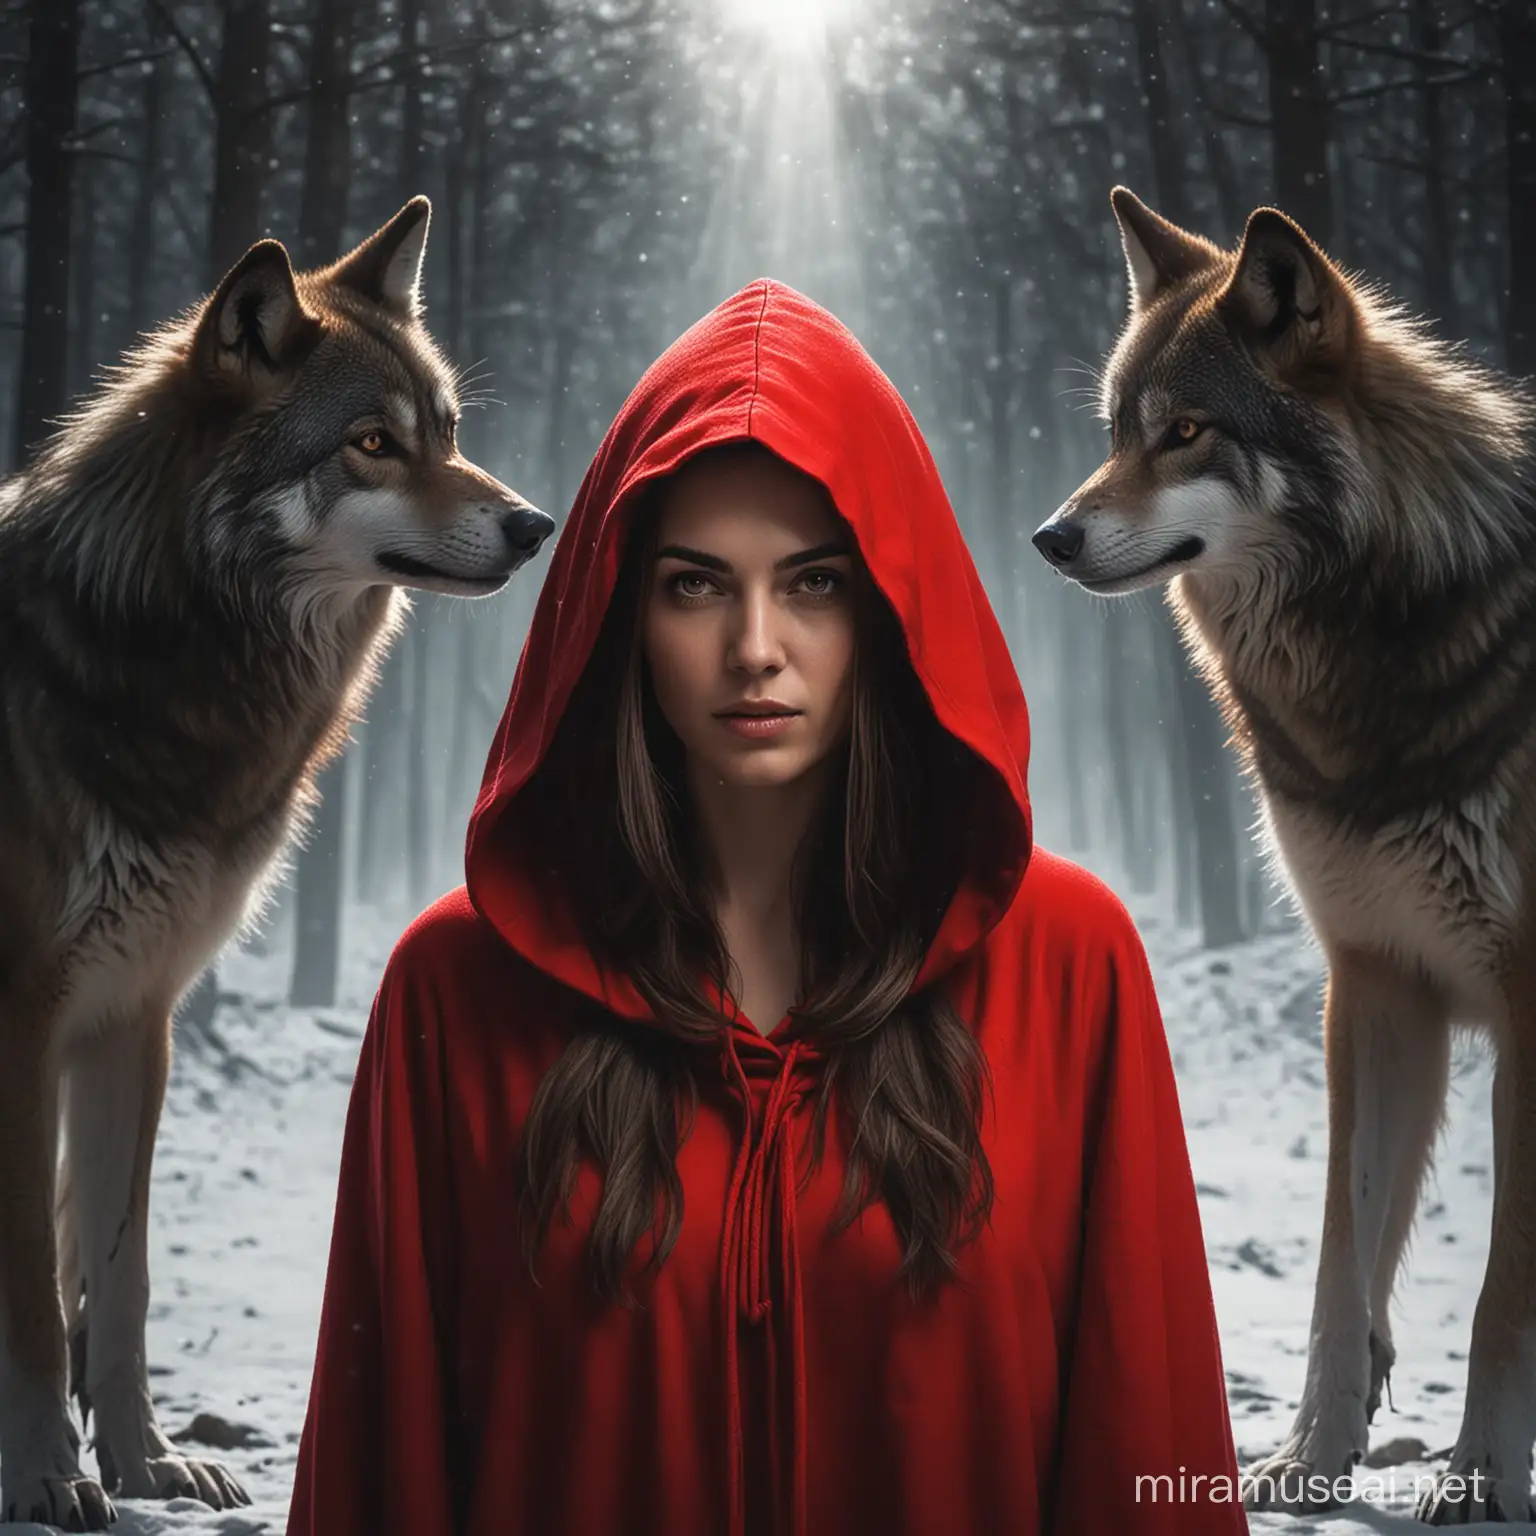 Mysterious Encounter Woman in Red Hooded Cloak with Wolves